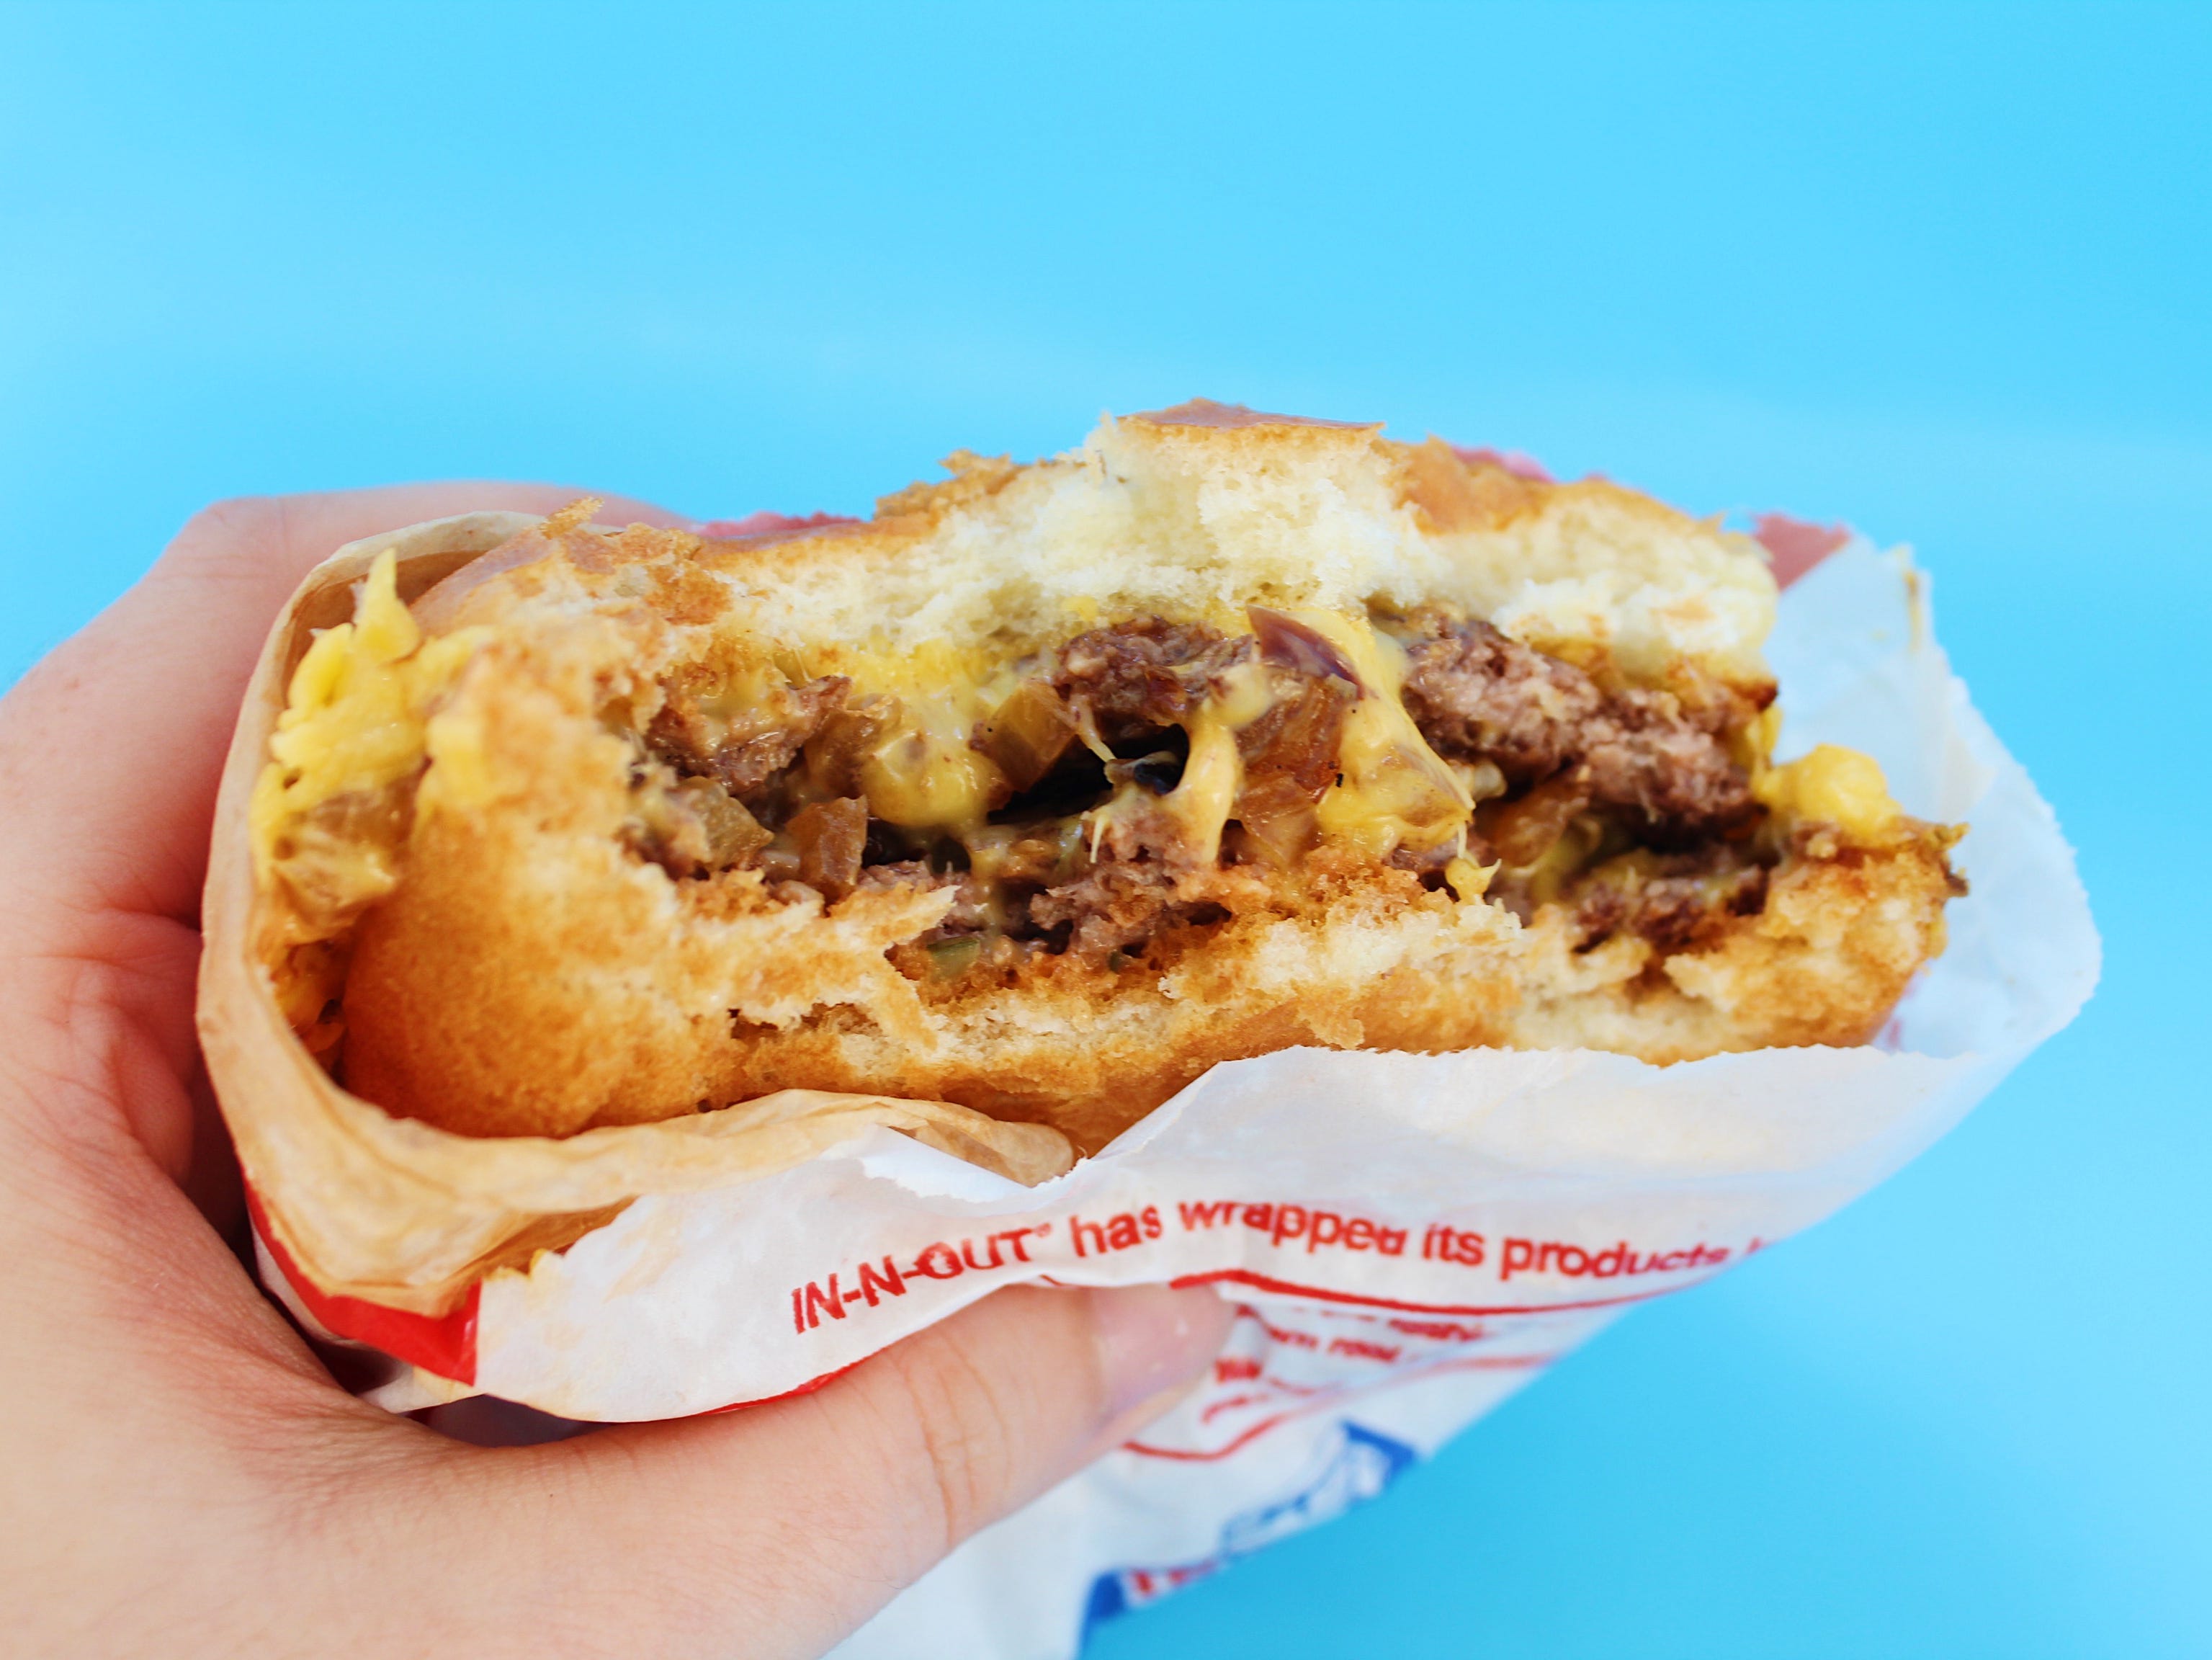 Doppel-Cheeseburger „In n Out“